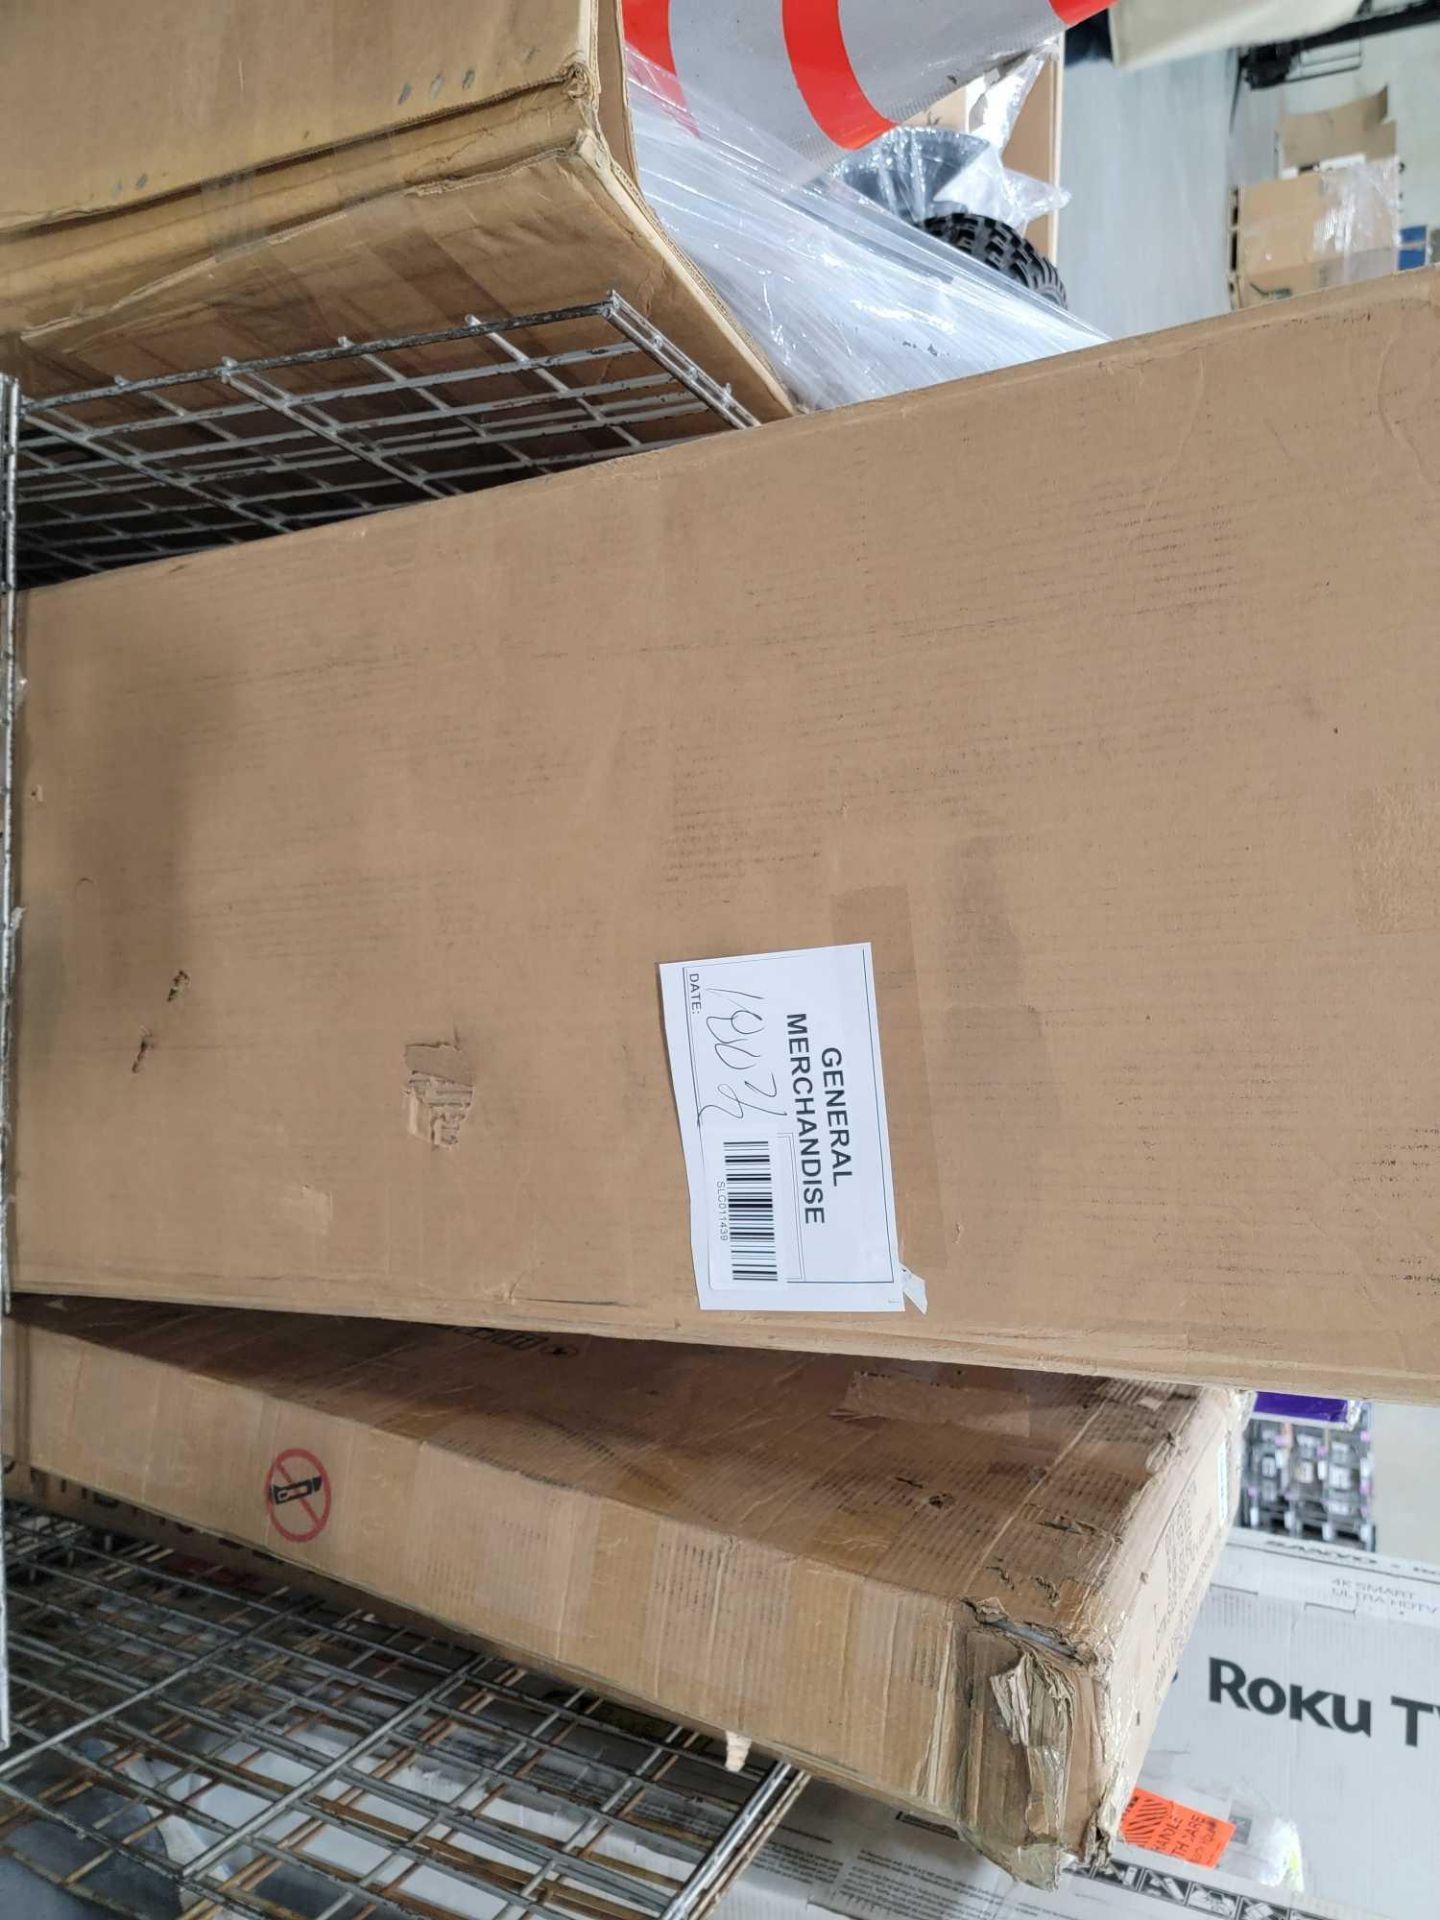 Two Pallets - Image 11 of 15